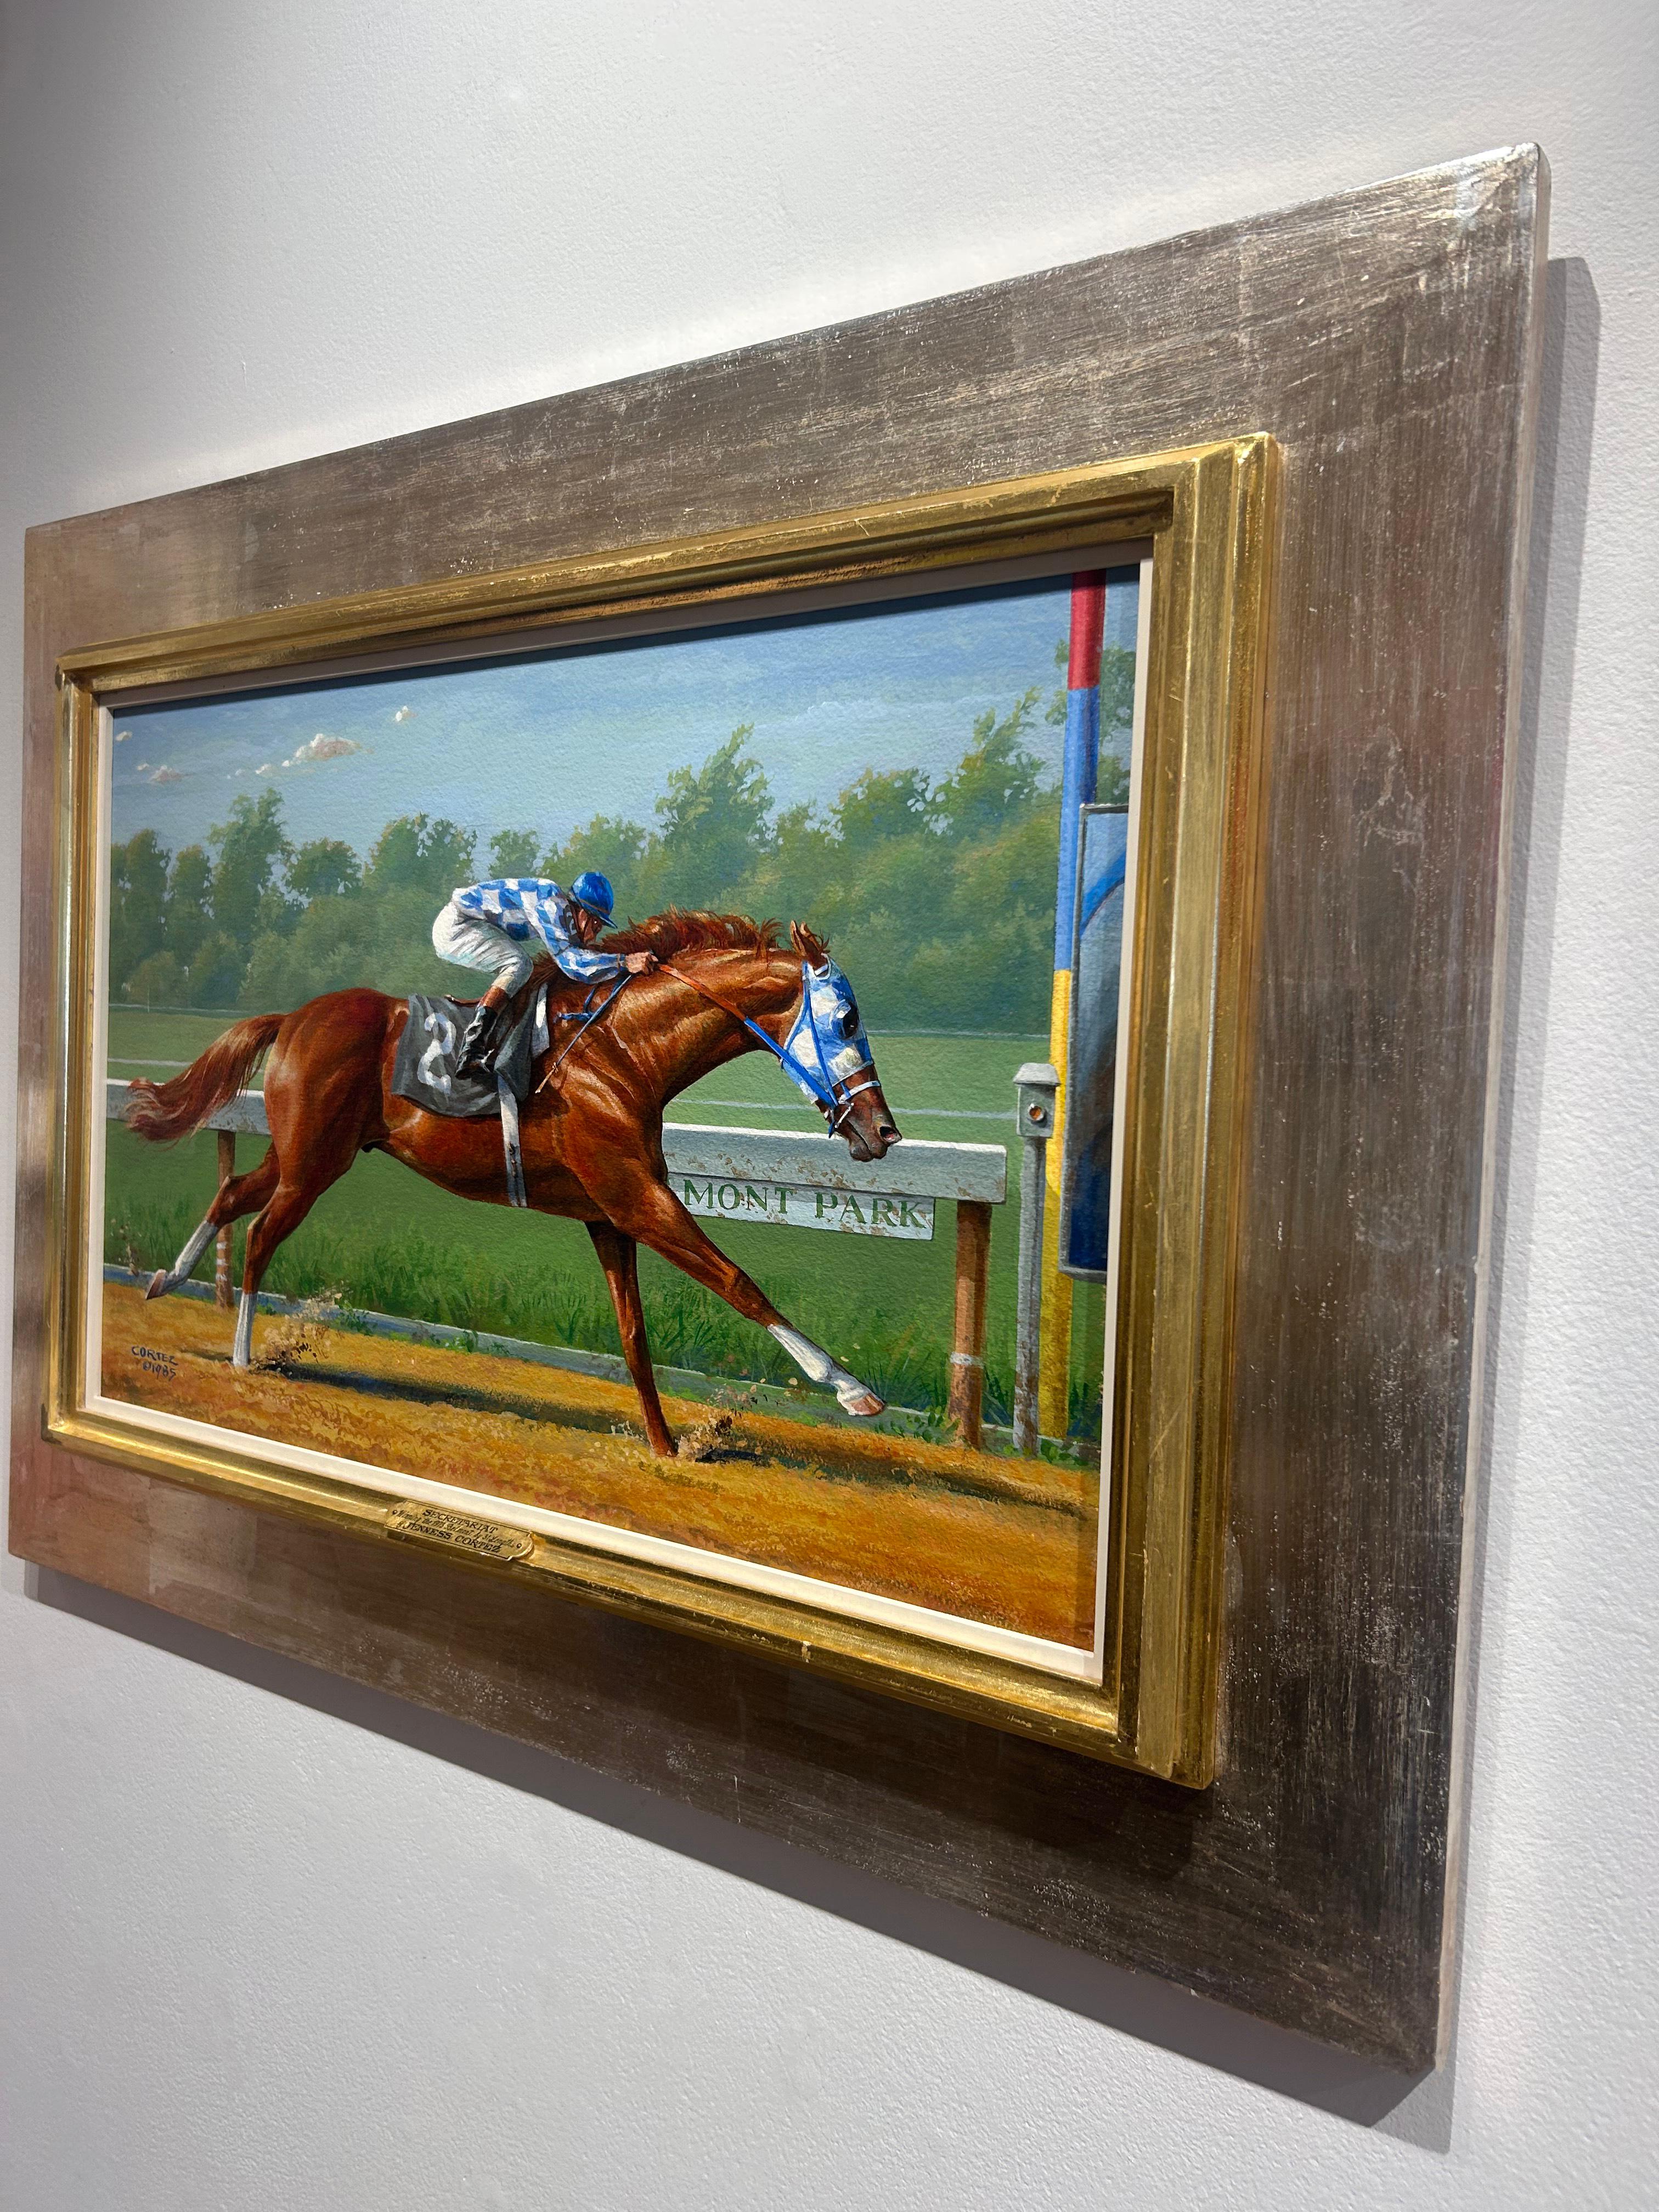 This rare original equine painting by renowned artist, Jenness Cortez, features legendary racehorse Secretariat sprinting towards the finish line at the 1973 Belmont race, winning by an incredible and historical 31 lengths. 

Titled, “Secretariat,